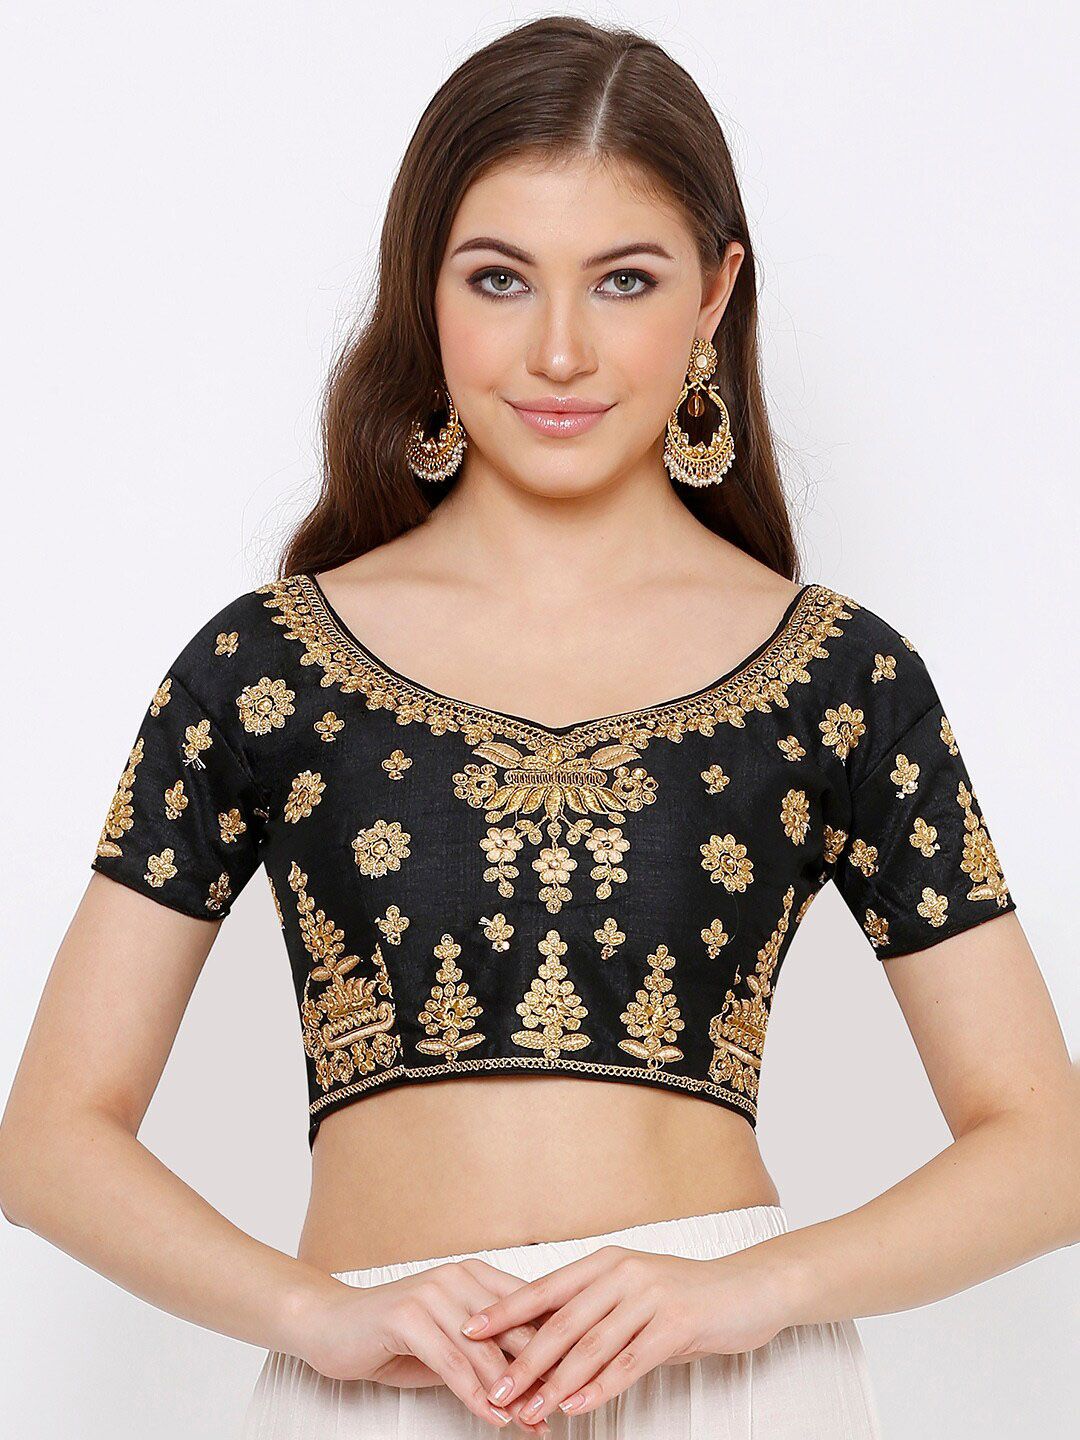 SALWAR STUDIO Women Black & Gold-Colored Embroidered Readymade Saree Blouse Price in India